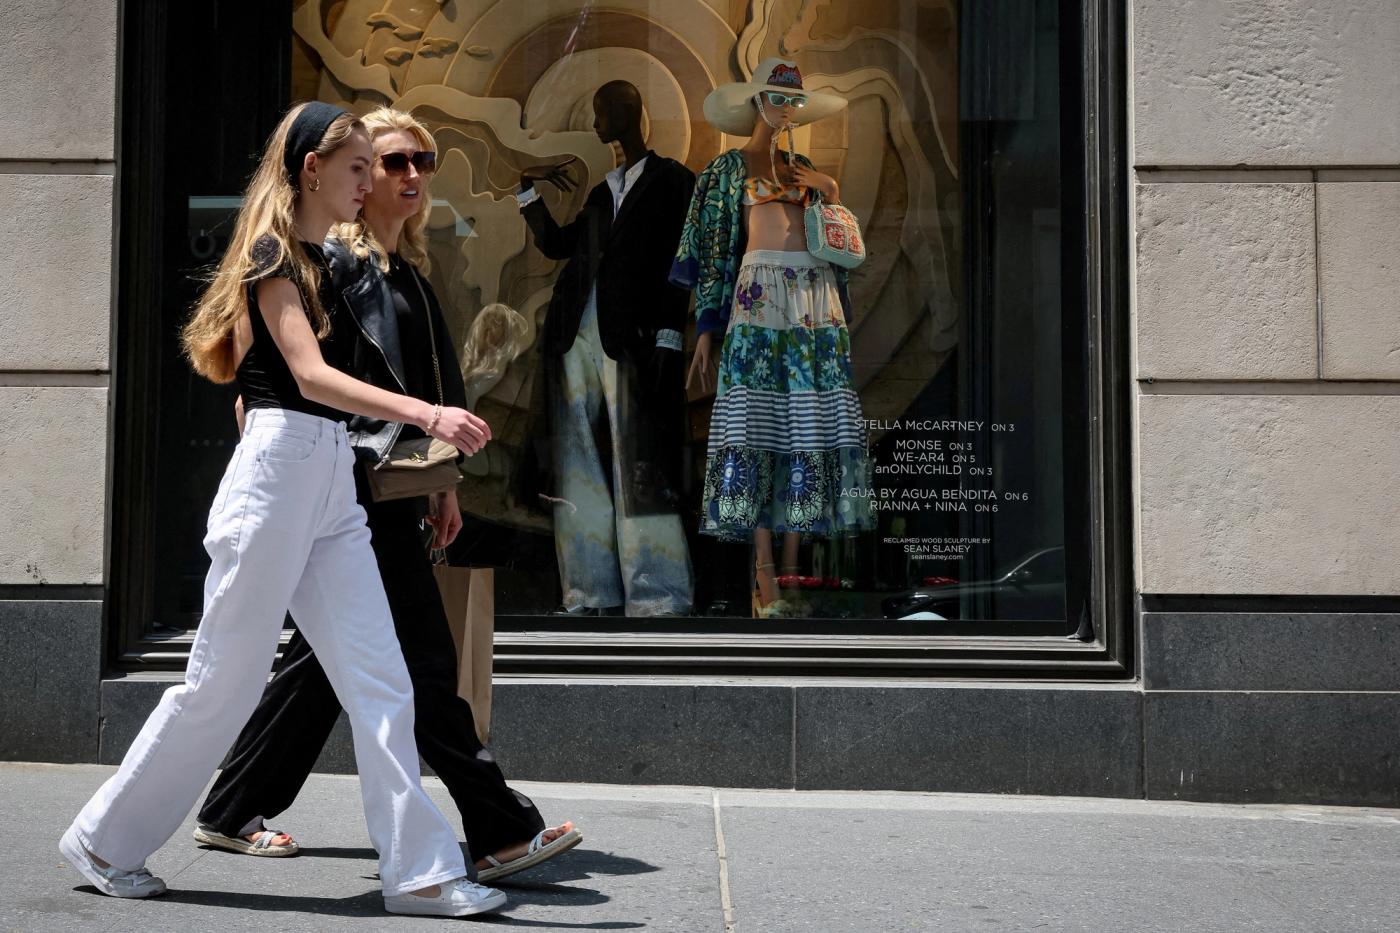 Shoppers on 5th Avenue pass by the Bergdorf Goodman store in New York City.